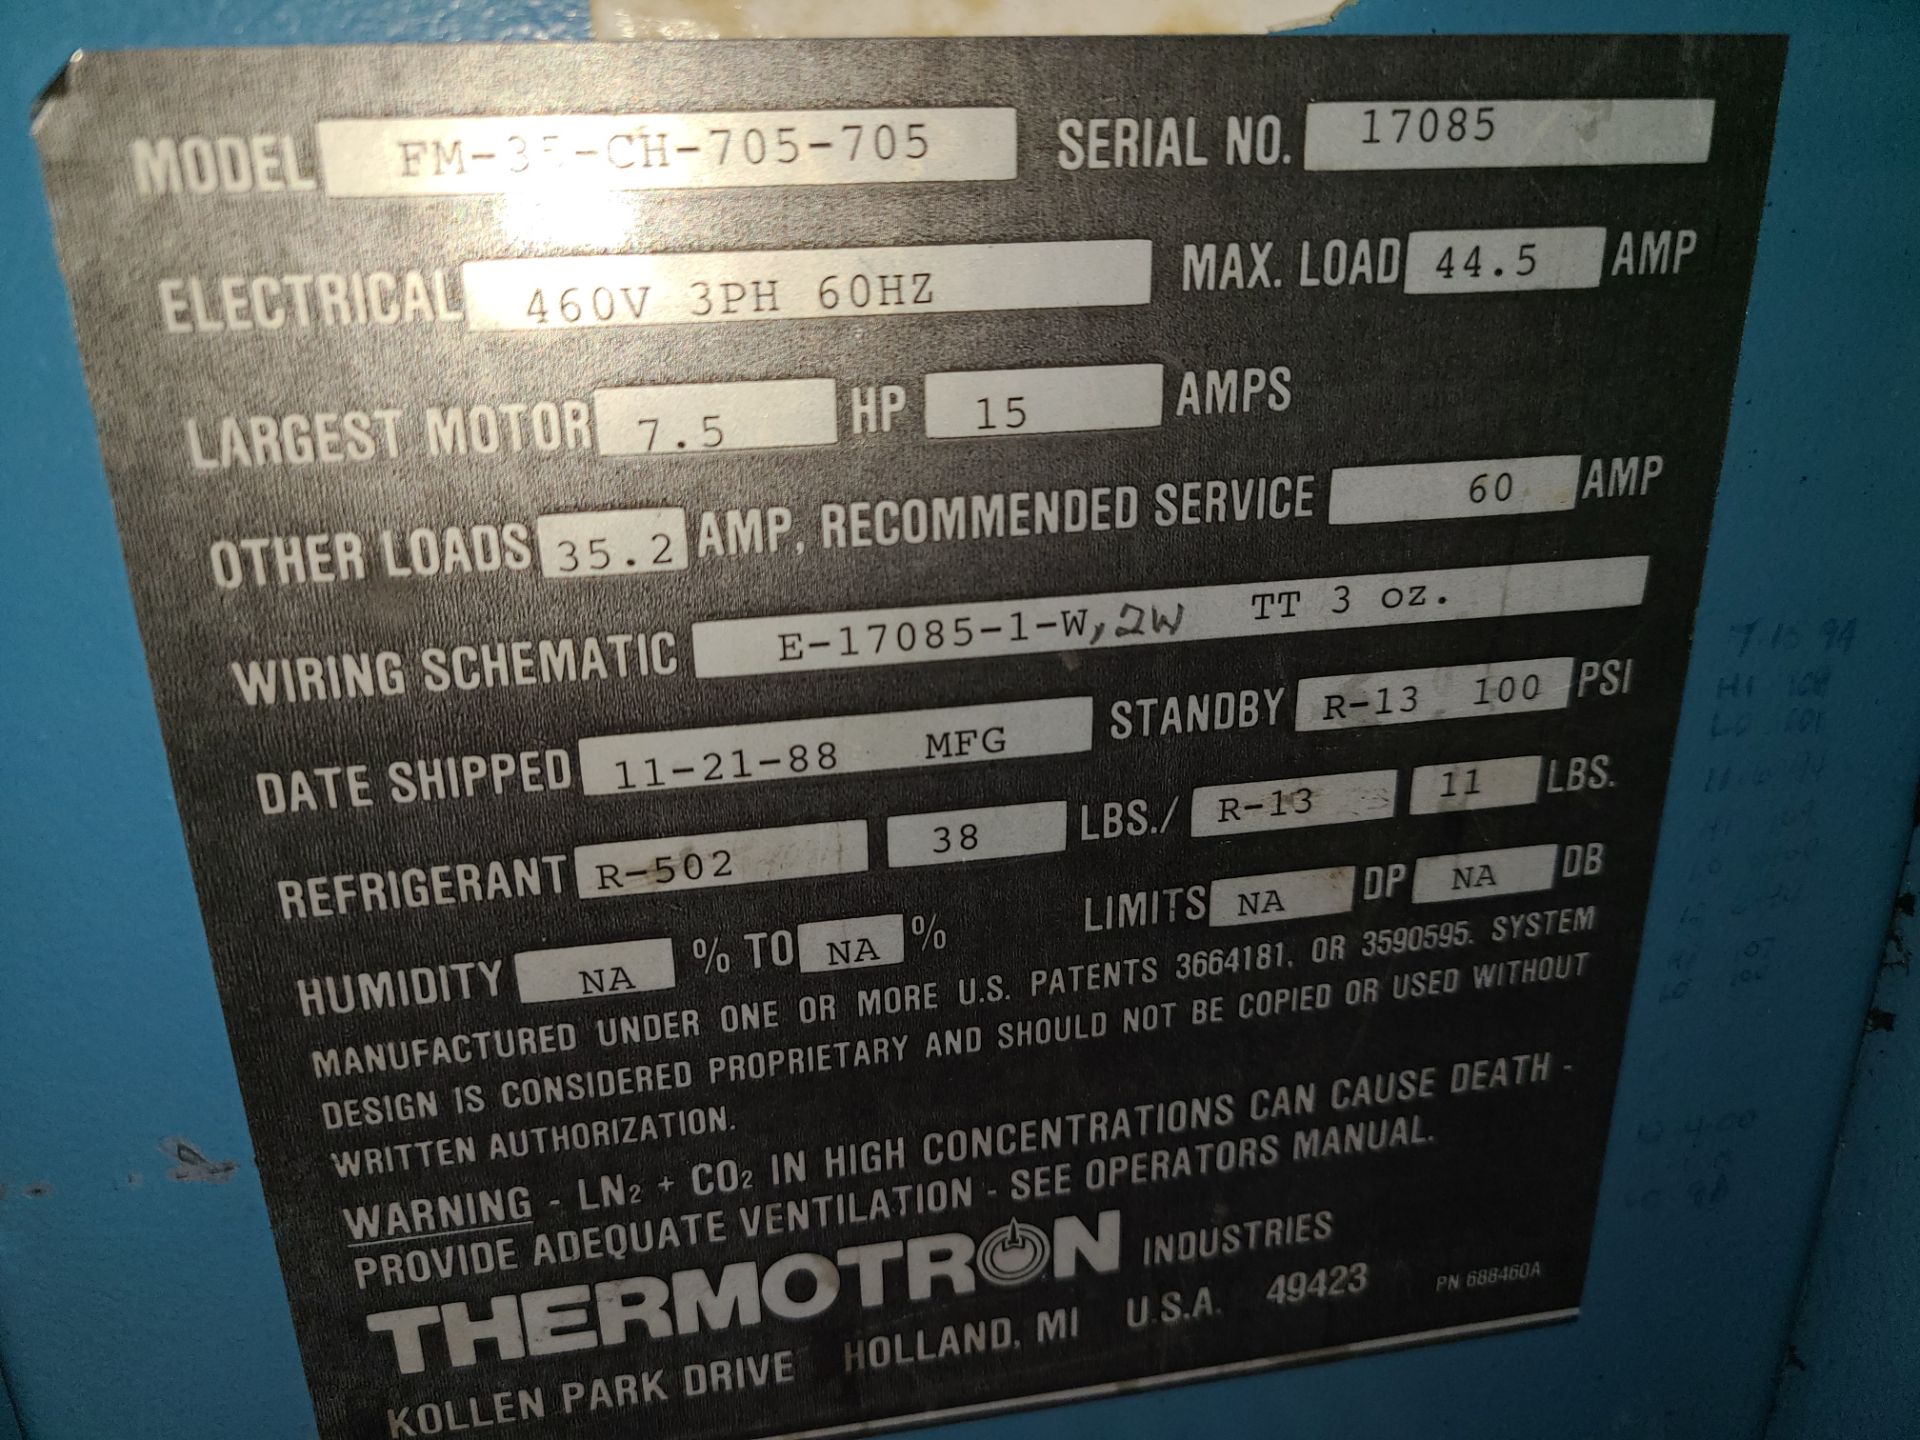 THERMOTRON ENVIRONMENTAL CHAMBER MODEL FM-35-CH-705-705 SERIAL NUMBER 17085 - Image 5 of 5